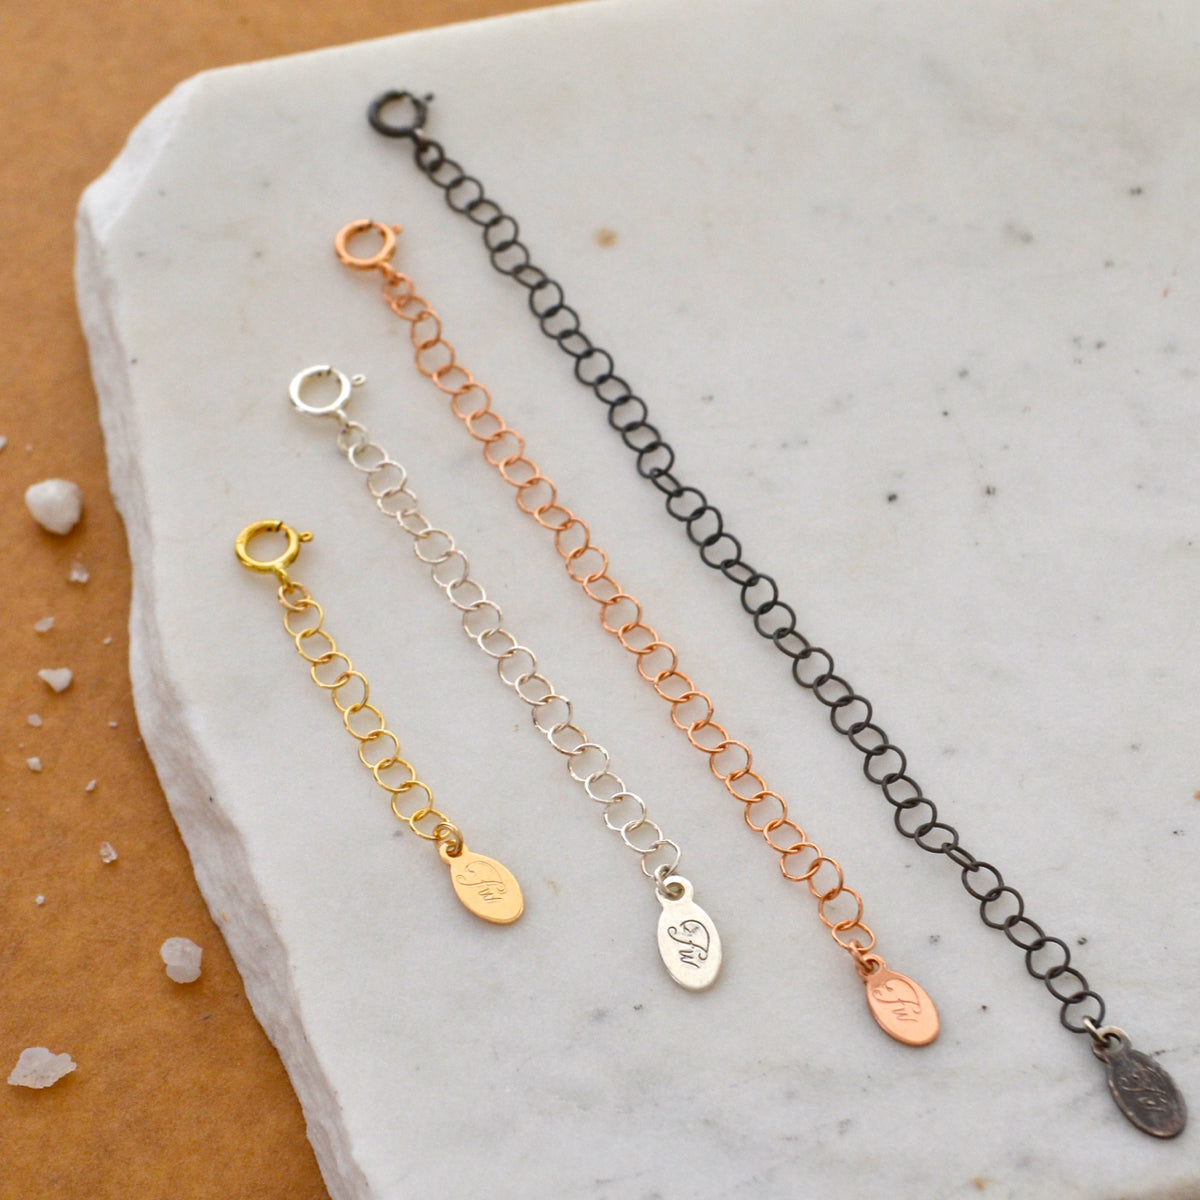 2 or 3 Inch Chain Extender by Caitlyn Minimalist Bracelet & Necklace  Extension in Gold, Sterling Silver, Rose Gold Adjustable Chain 